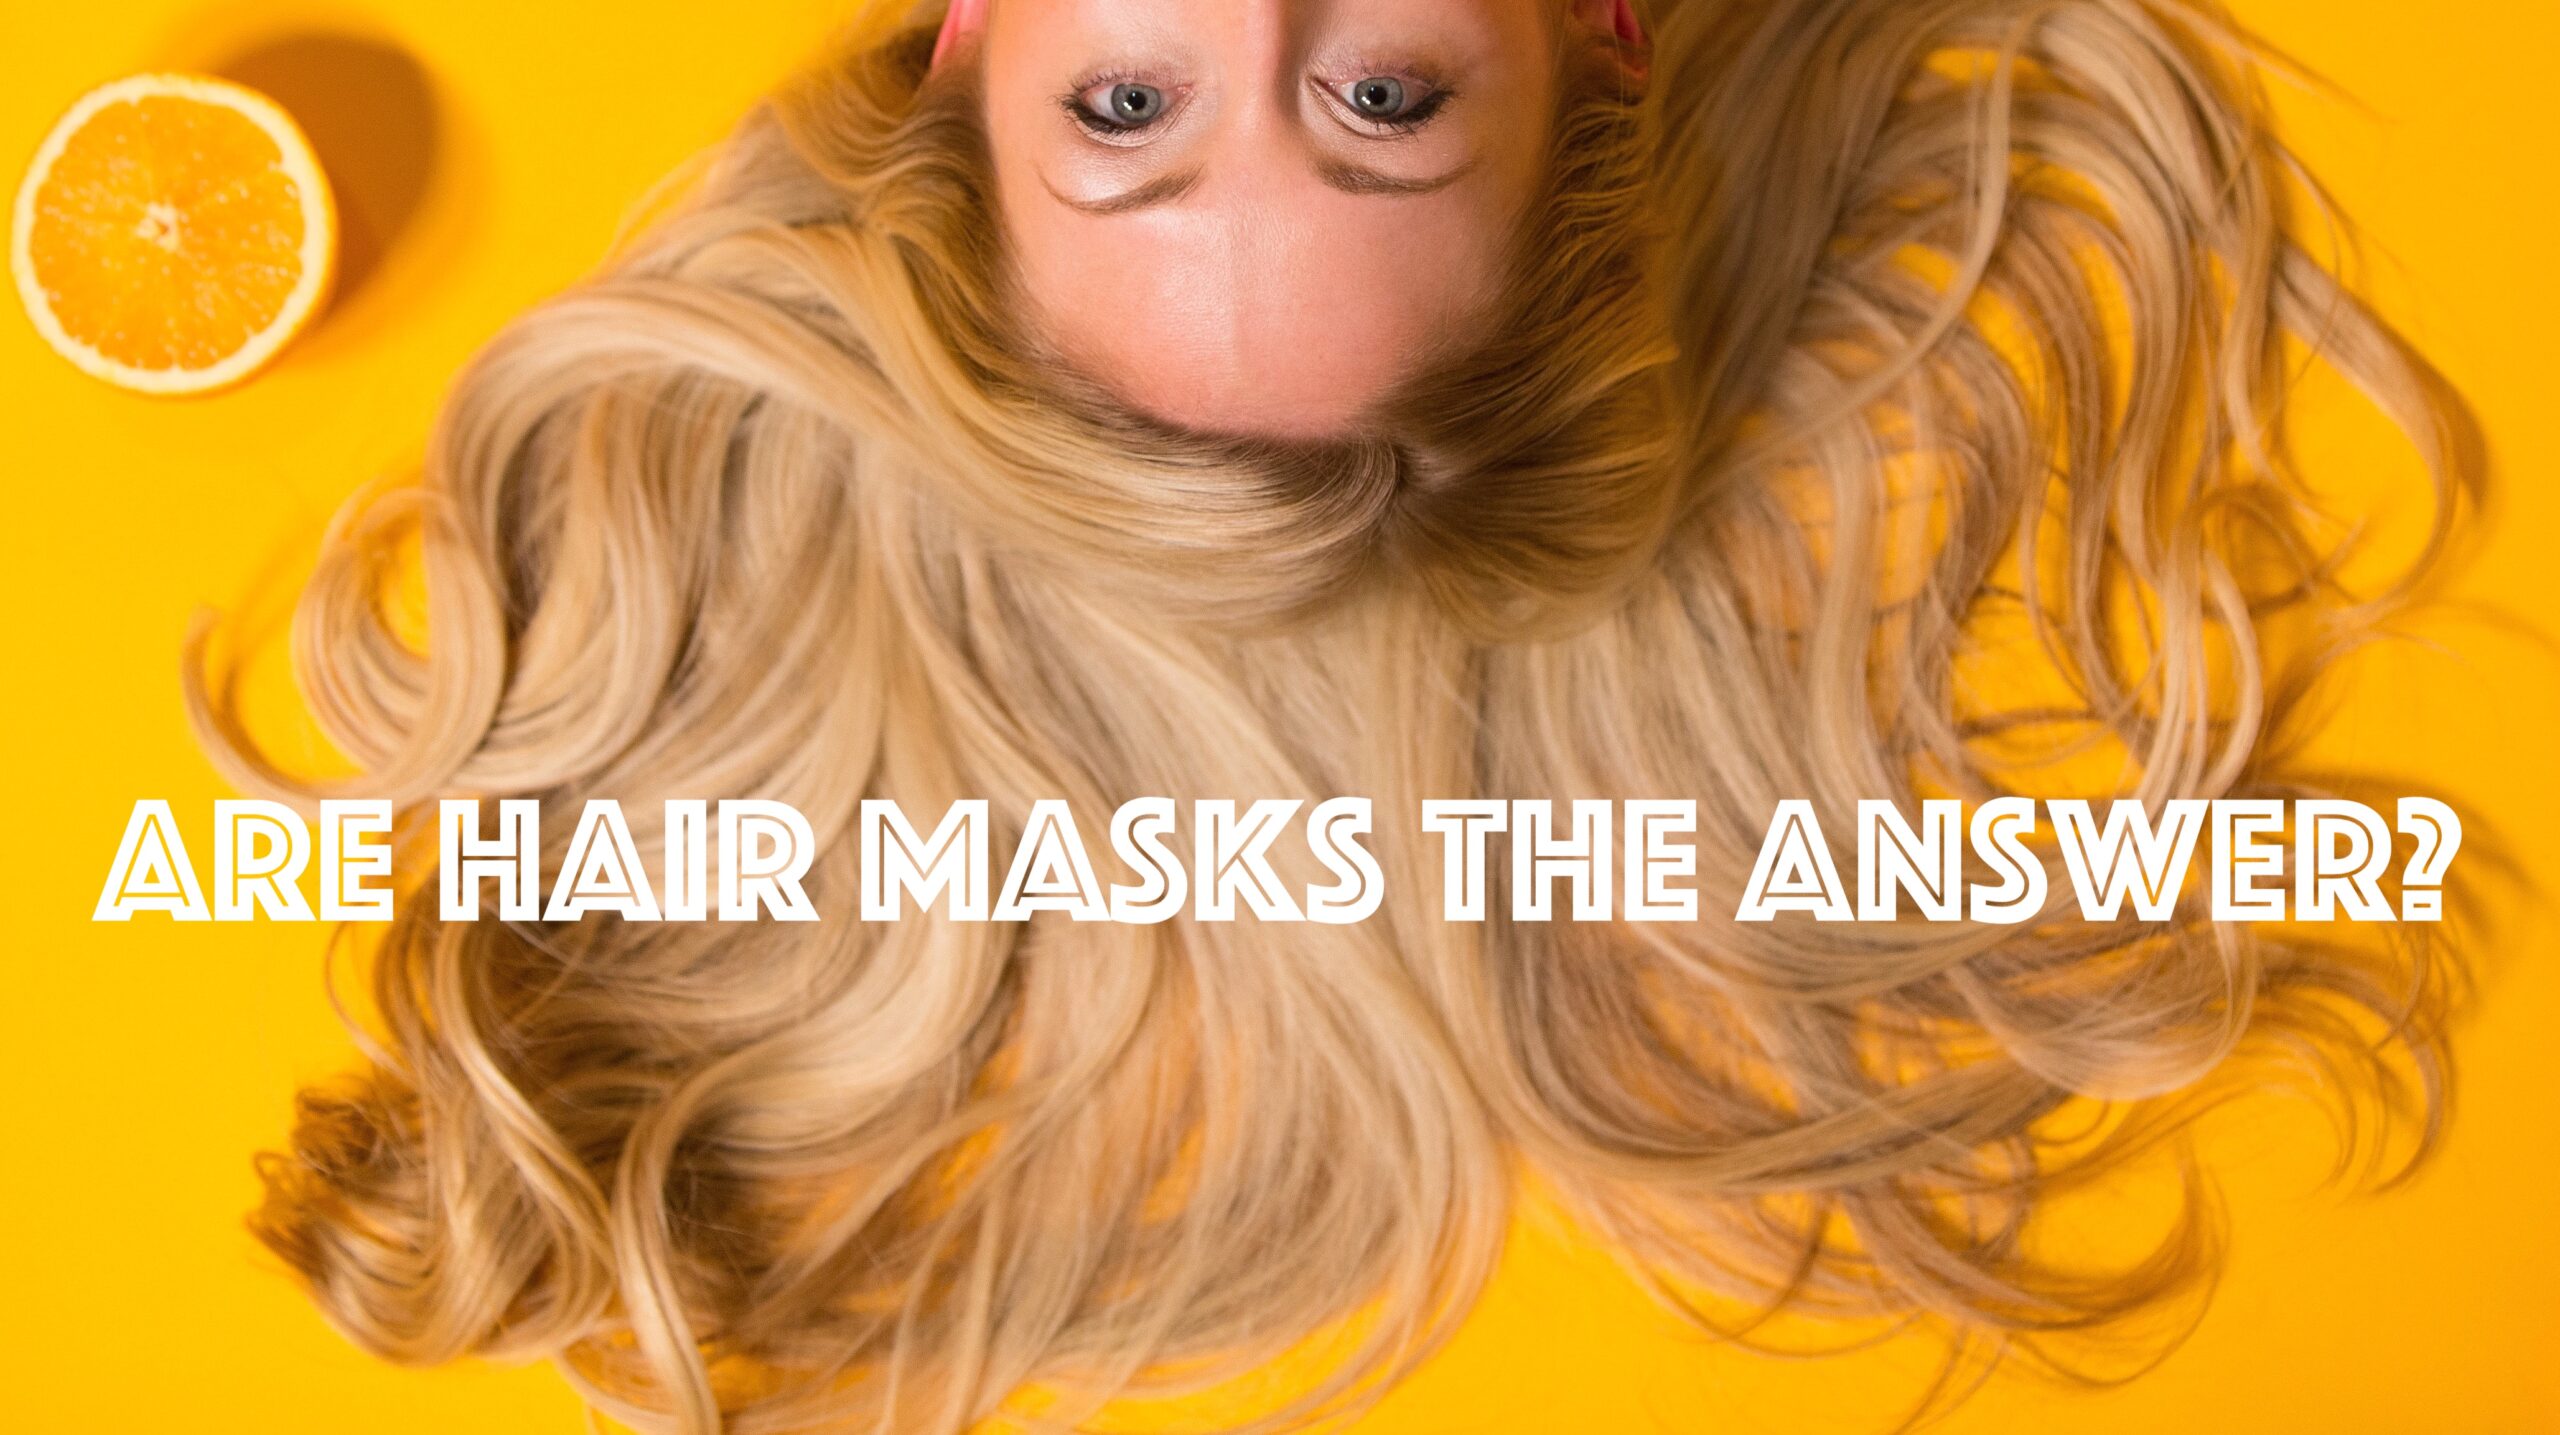 Are Hair Masks the Answer?